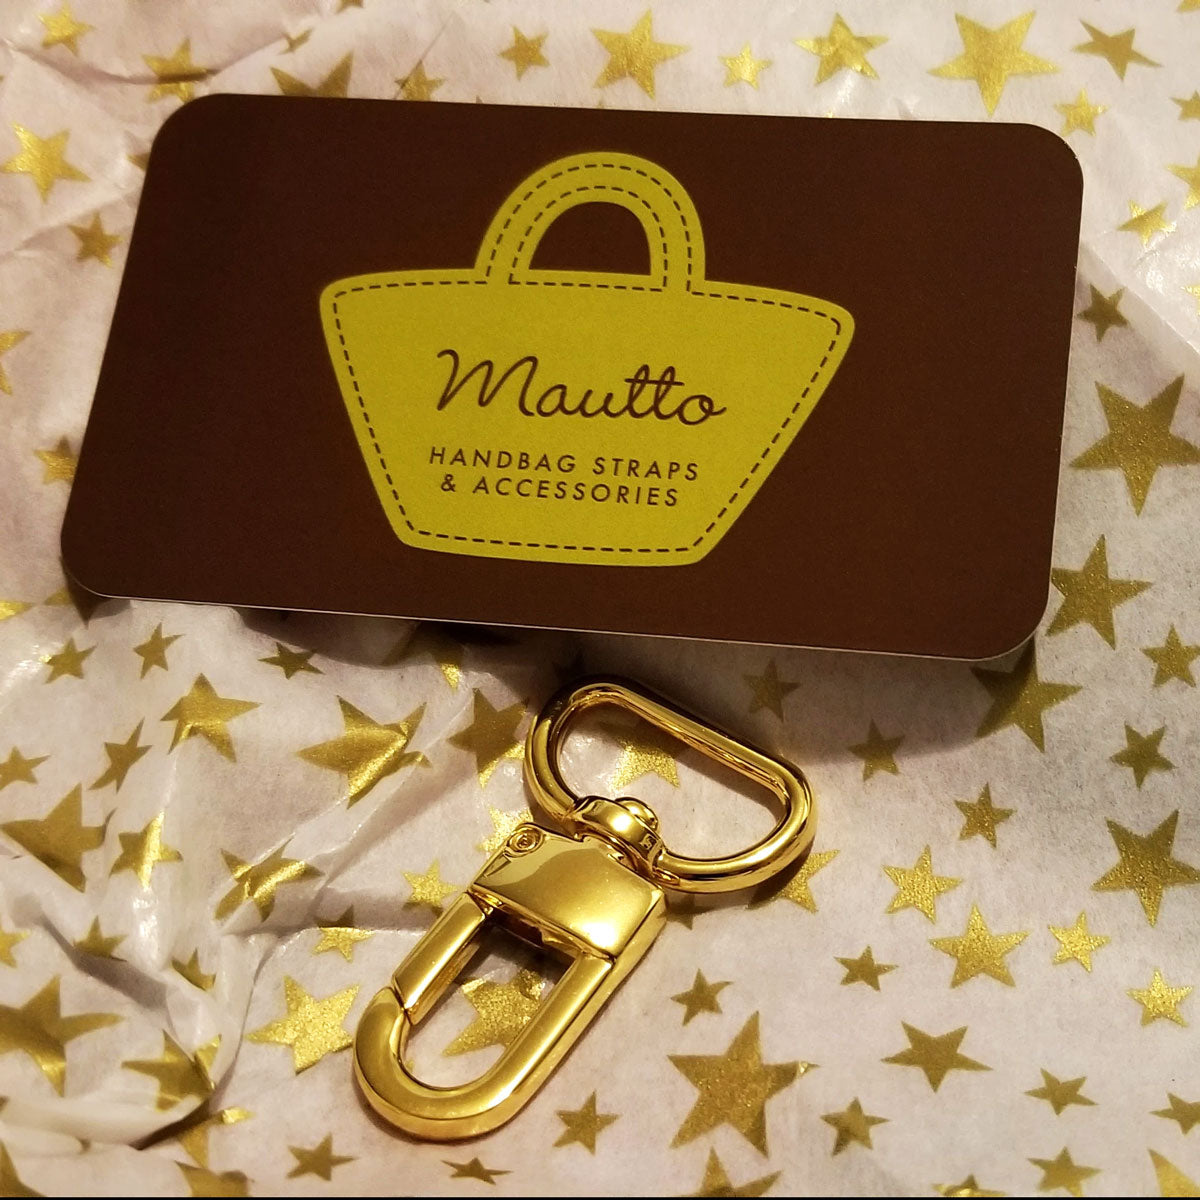 Accessories for Your Handbag, Purse, SLG, Tote, Wallet & more – Mautto